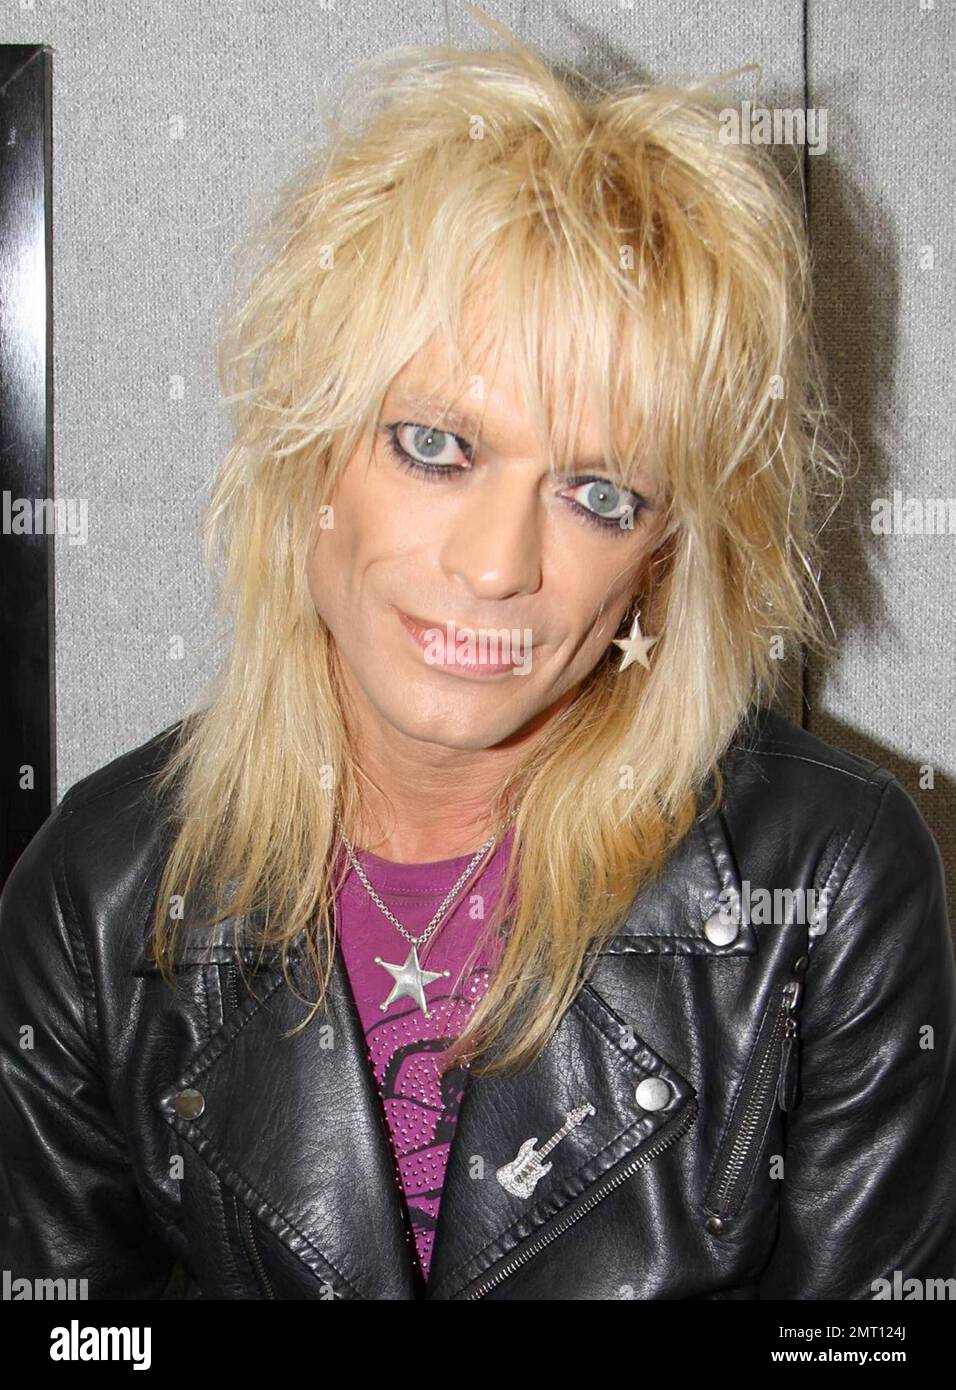 Finnish rock musician Michael Monroe (Matti Fagerholm) poses backstage at the 2010 Download Festival.  With a career spanning three decades the 47-year-old glam rock star has produced six solo albums and several with the band Hanoi Rocks. Derby, UK. 06/12/10. Stock Photo